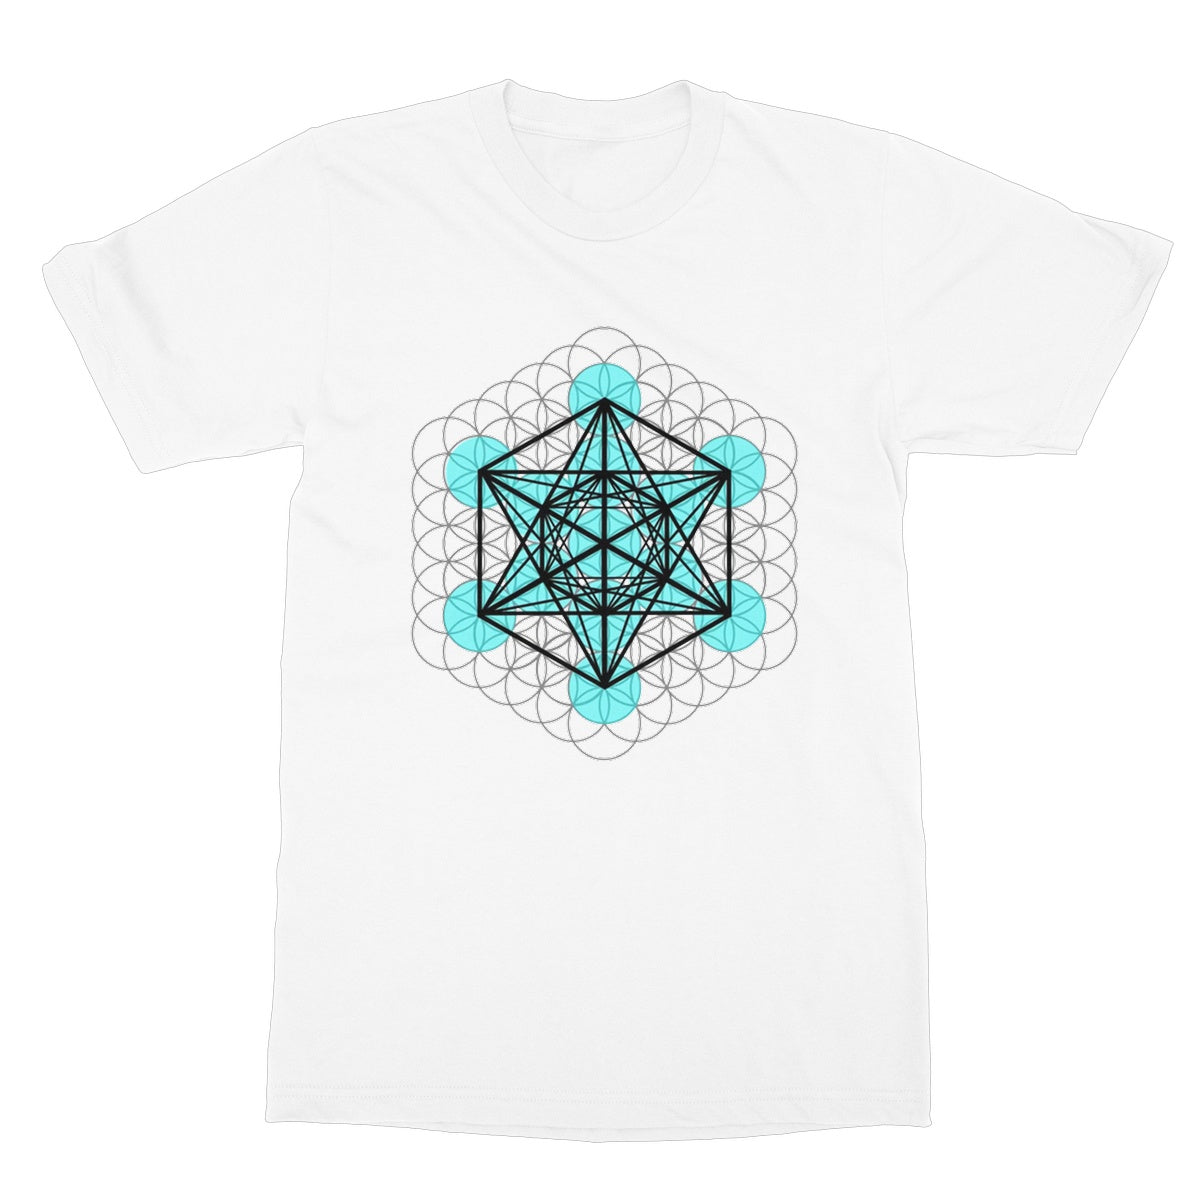 Fruit of Life, Metatron’s Cube Softstyle T-Shirt - Nature of Flowers